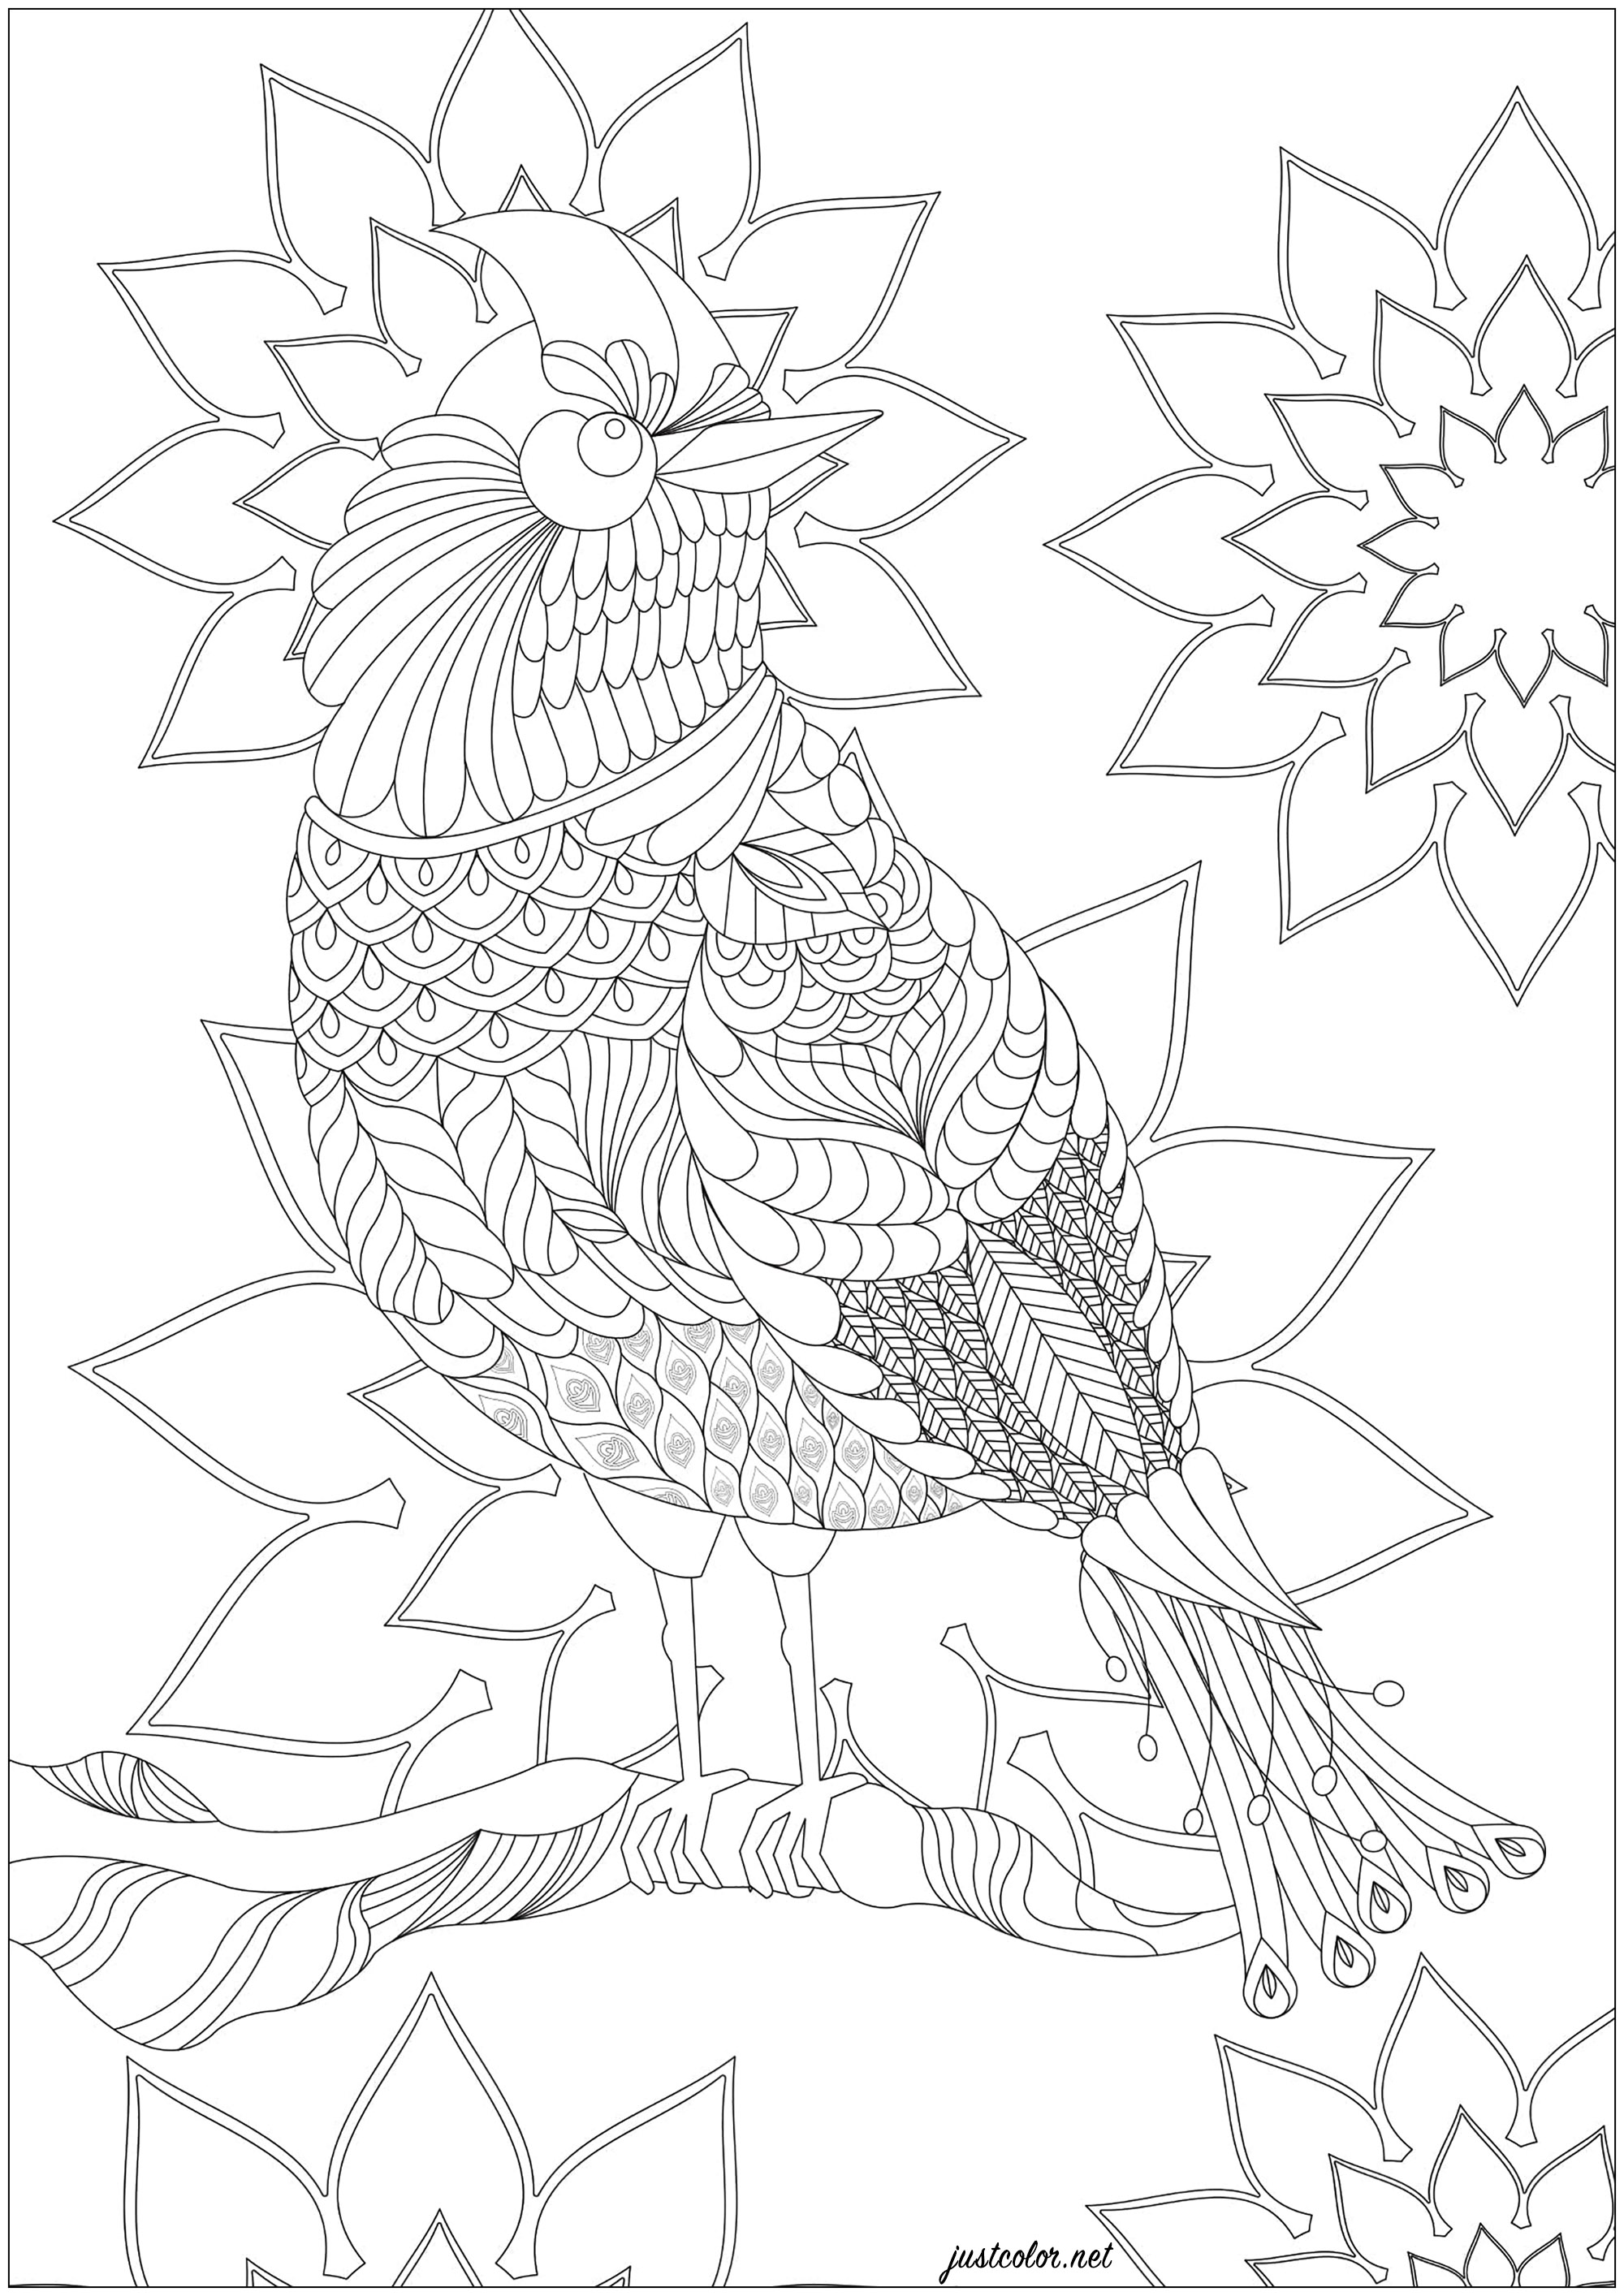 Imaginary bird, between the golden pheasant and the bird of paradise, with many patterns to color